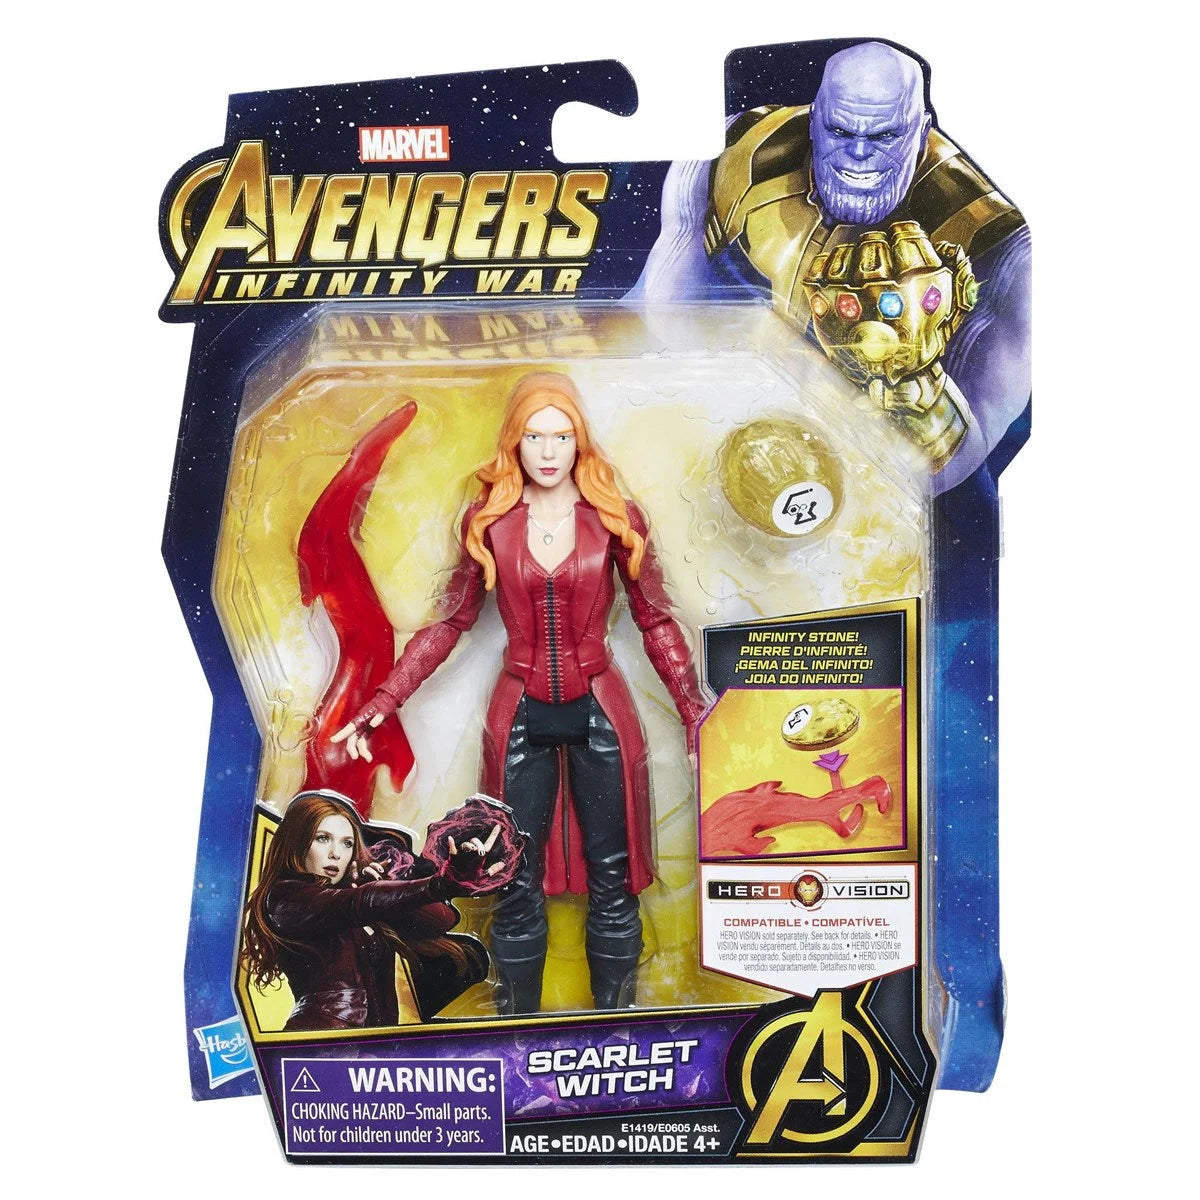 Avengers: Infinity War Scarlet Witch E0605-E1419 | Toysall